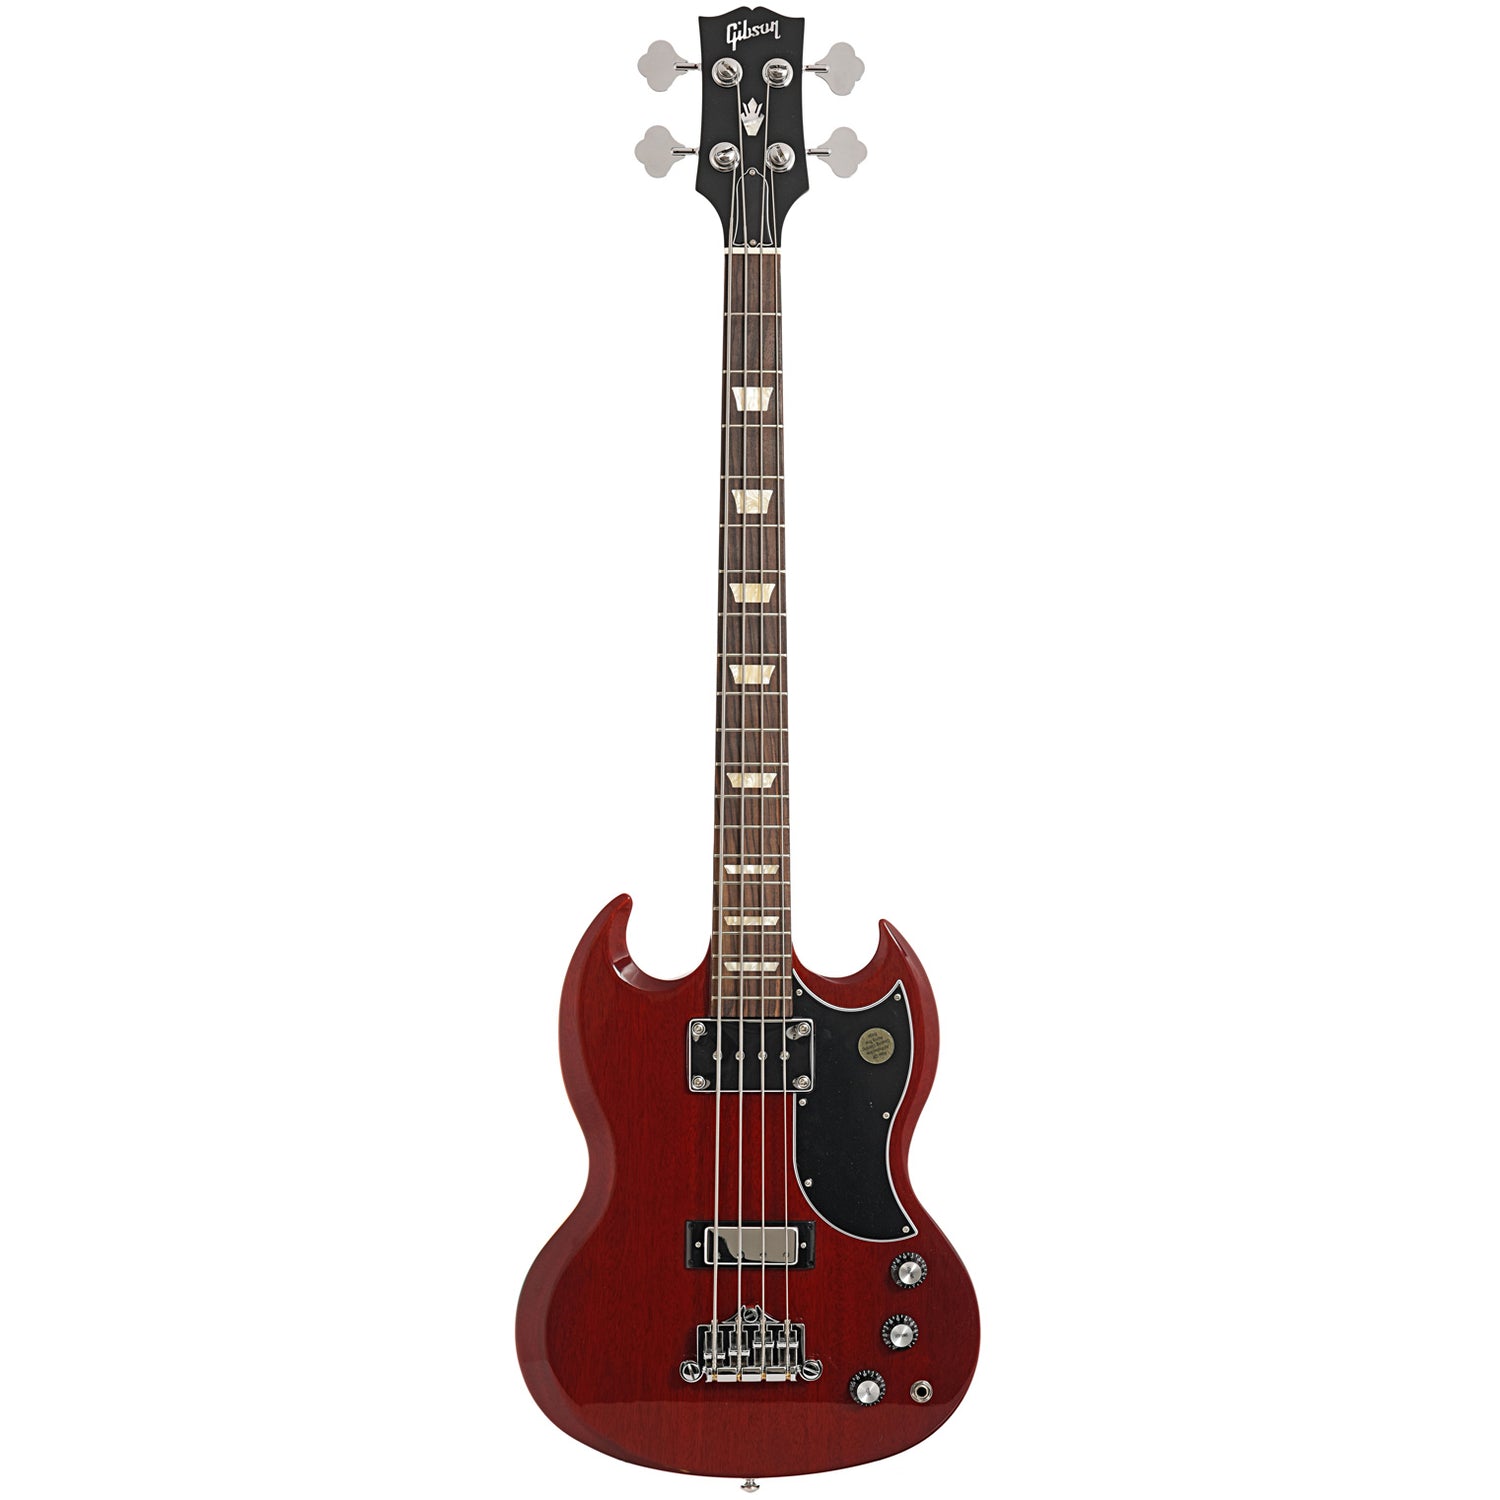 Full front of Gibson SG Bass